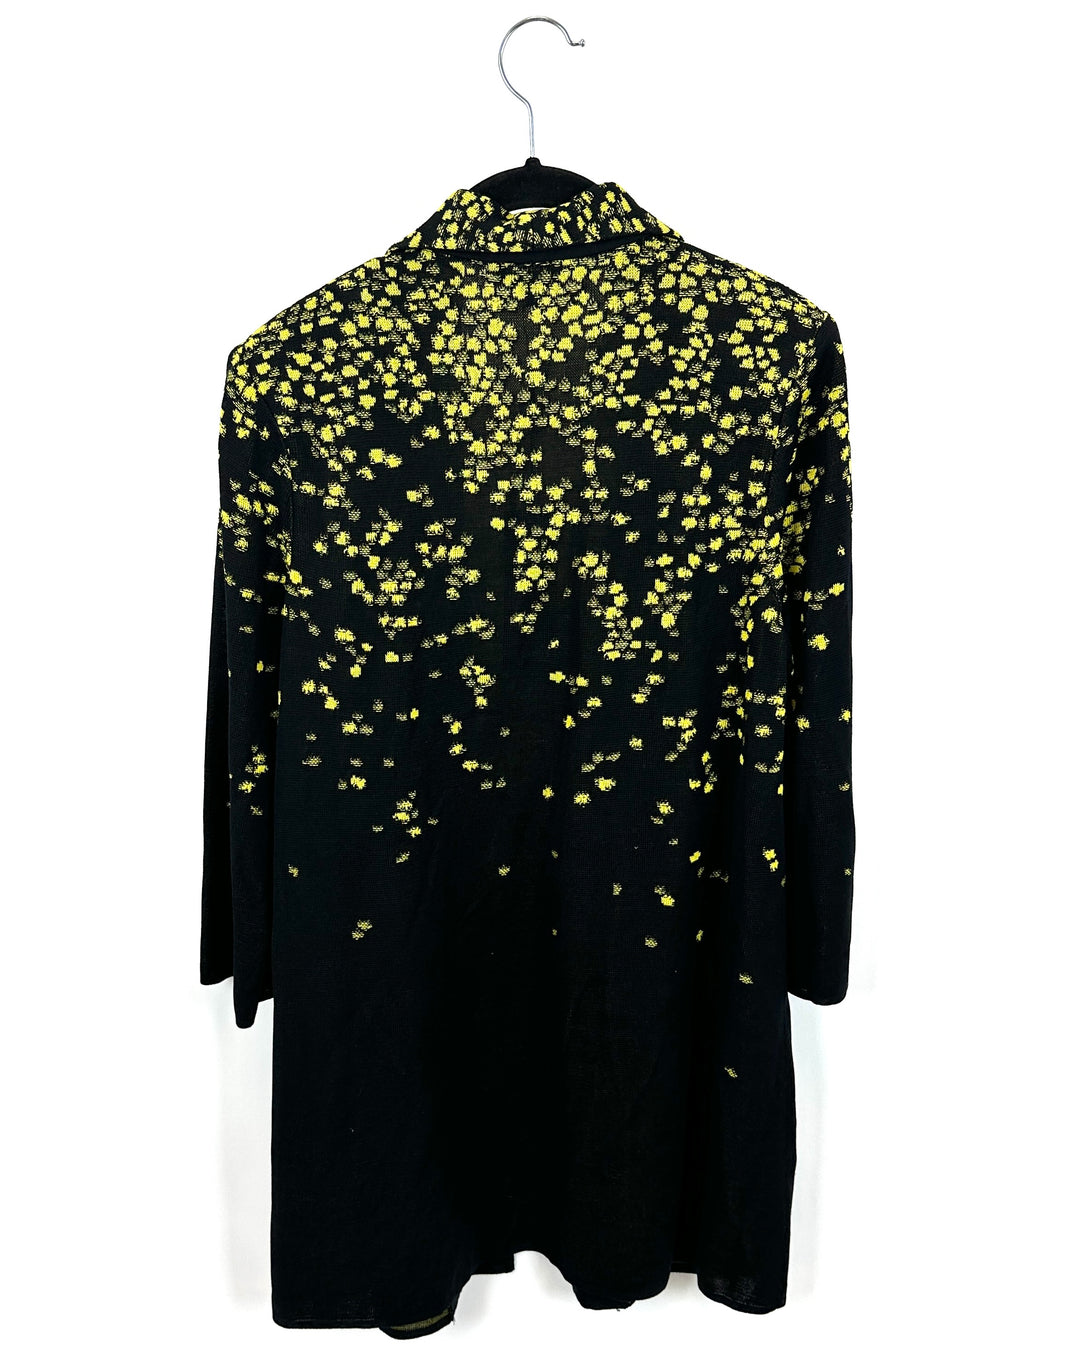 Long Black and Yellow Speckled Cardigan - Size 2/4